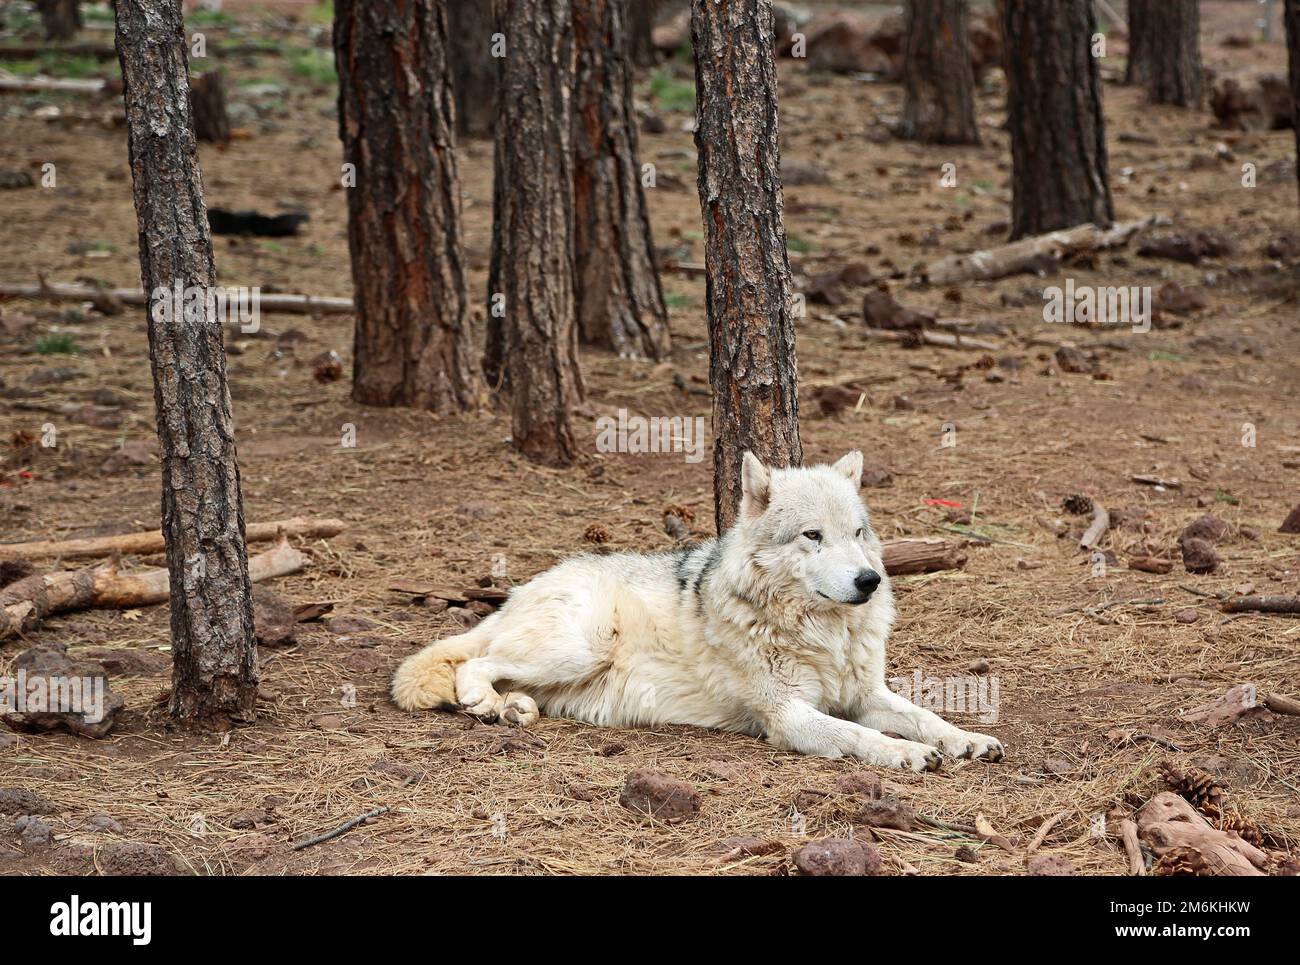 Alaskan tundra Wolf in forest Stock Photo